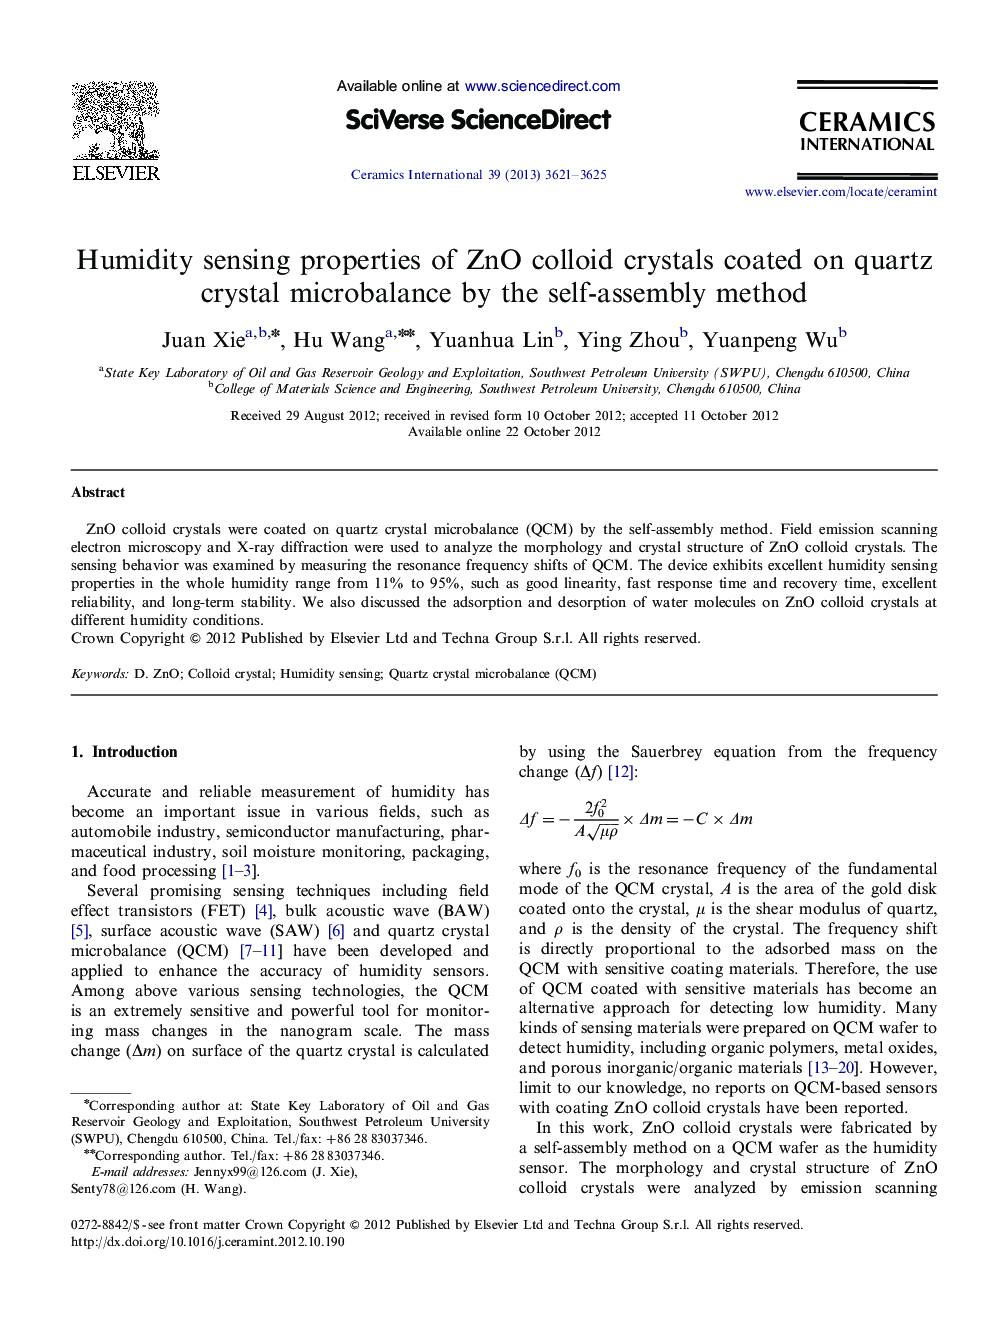 Humidity sensing properties of ZnO colloid crystals coated on quartz crystal microbalance by the self-assembly method